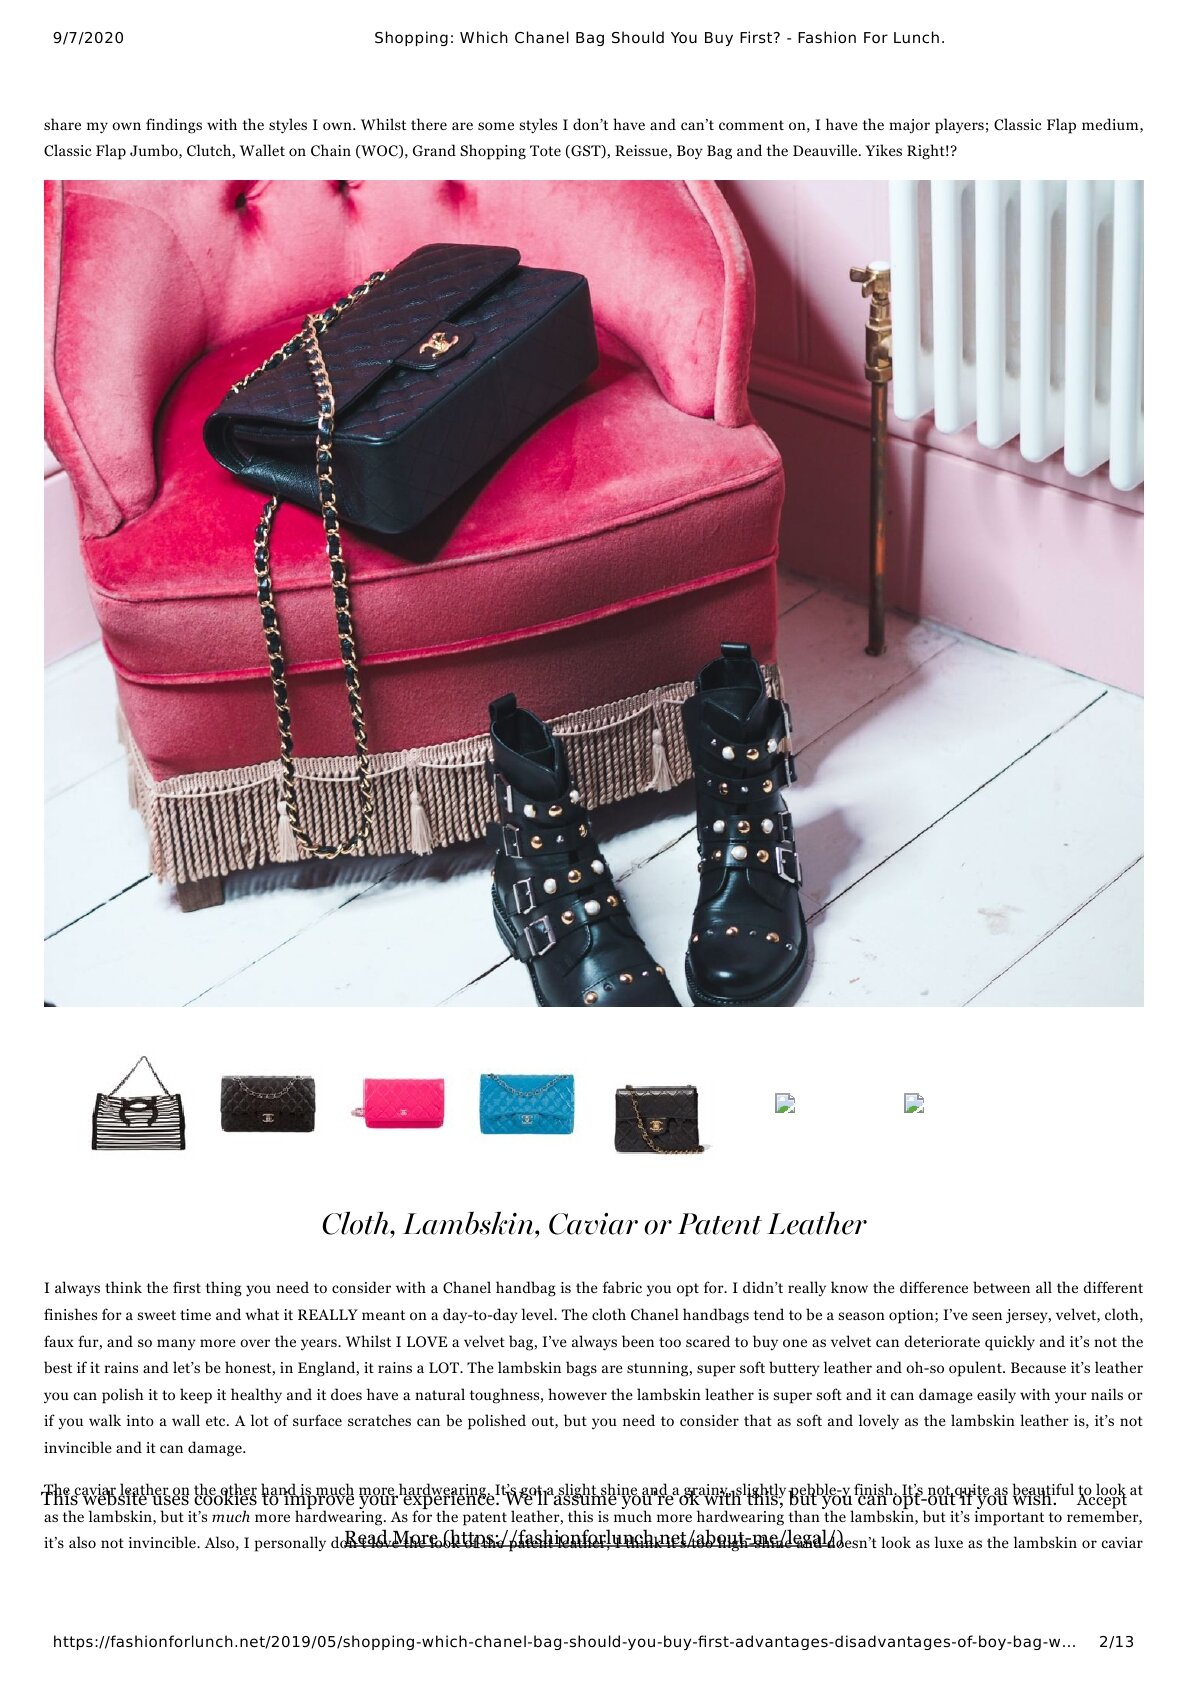 18. Which Chanel Bag Should You Buy First? - My Dreamz Closet